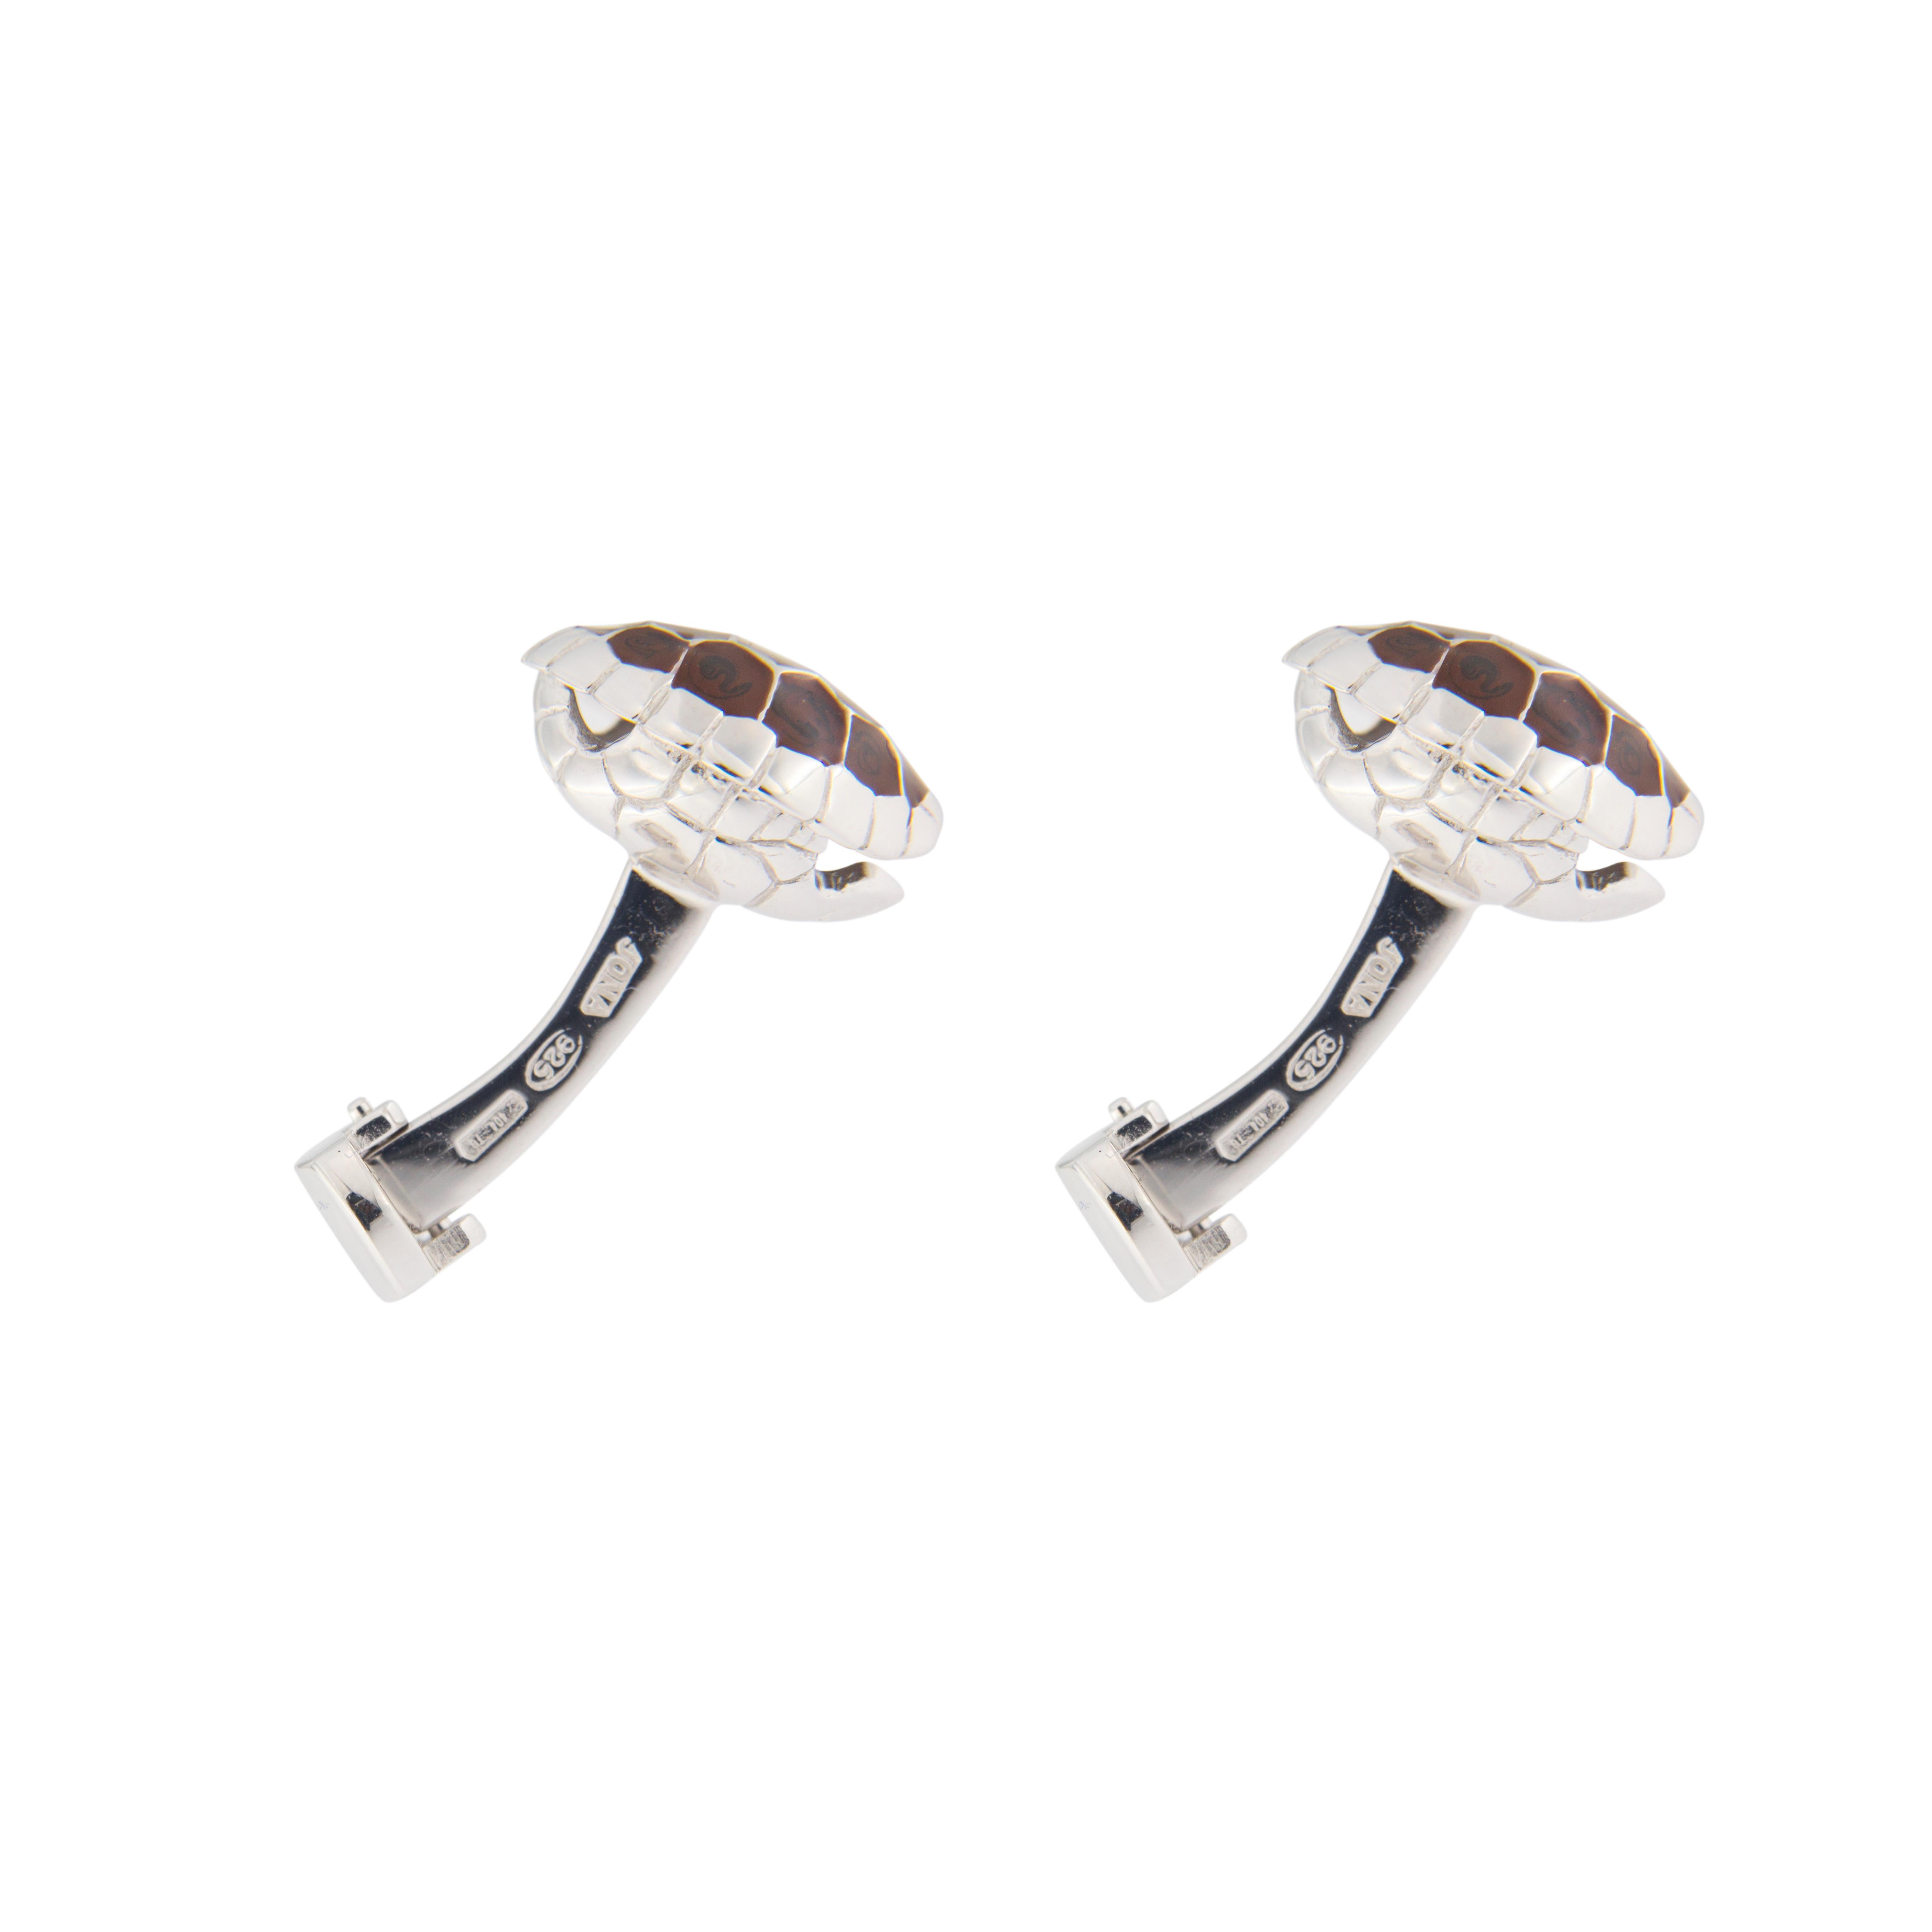 Jona design collection, hand crafted in Italy, rhodium plated sterling silver Mother of Pearl cufflinks. Marked Jona 925.Dimensions: 0.55 in W x 0.63 in H  - 13 mm W x 16 mm H
All Jona jewelry is new and has never been previously owned or worn. Each